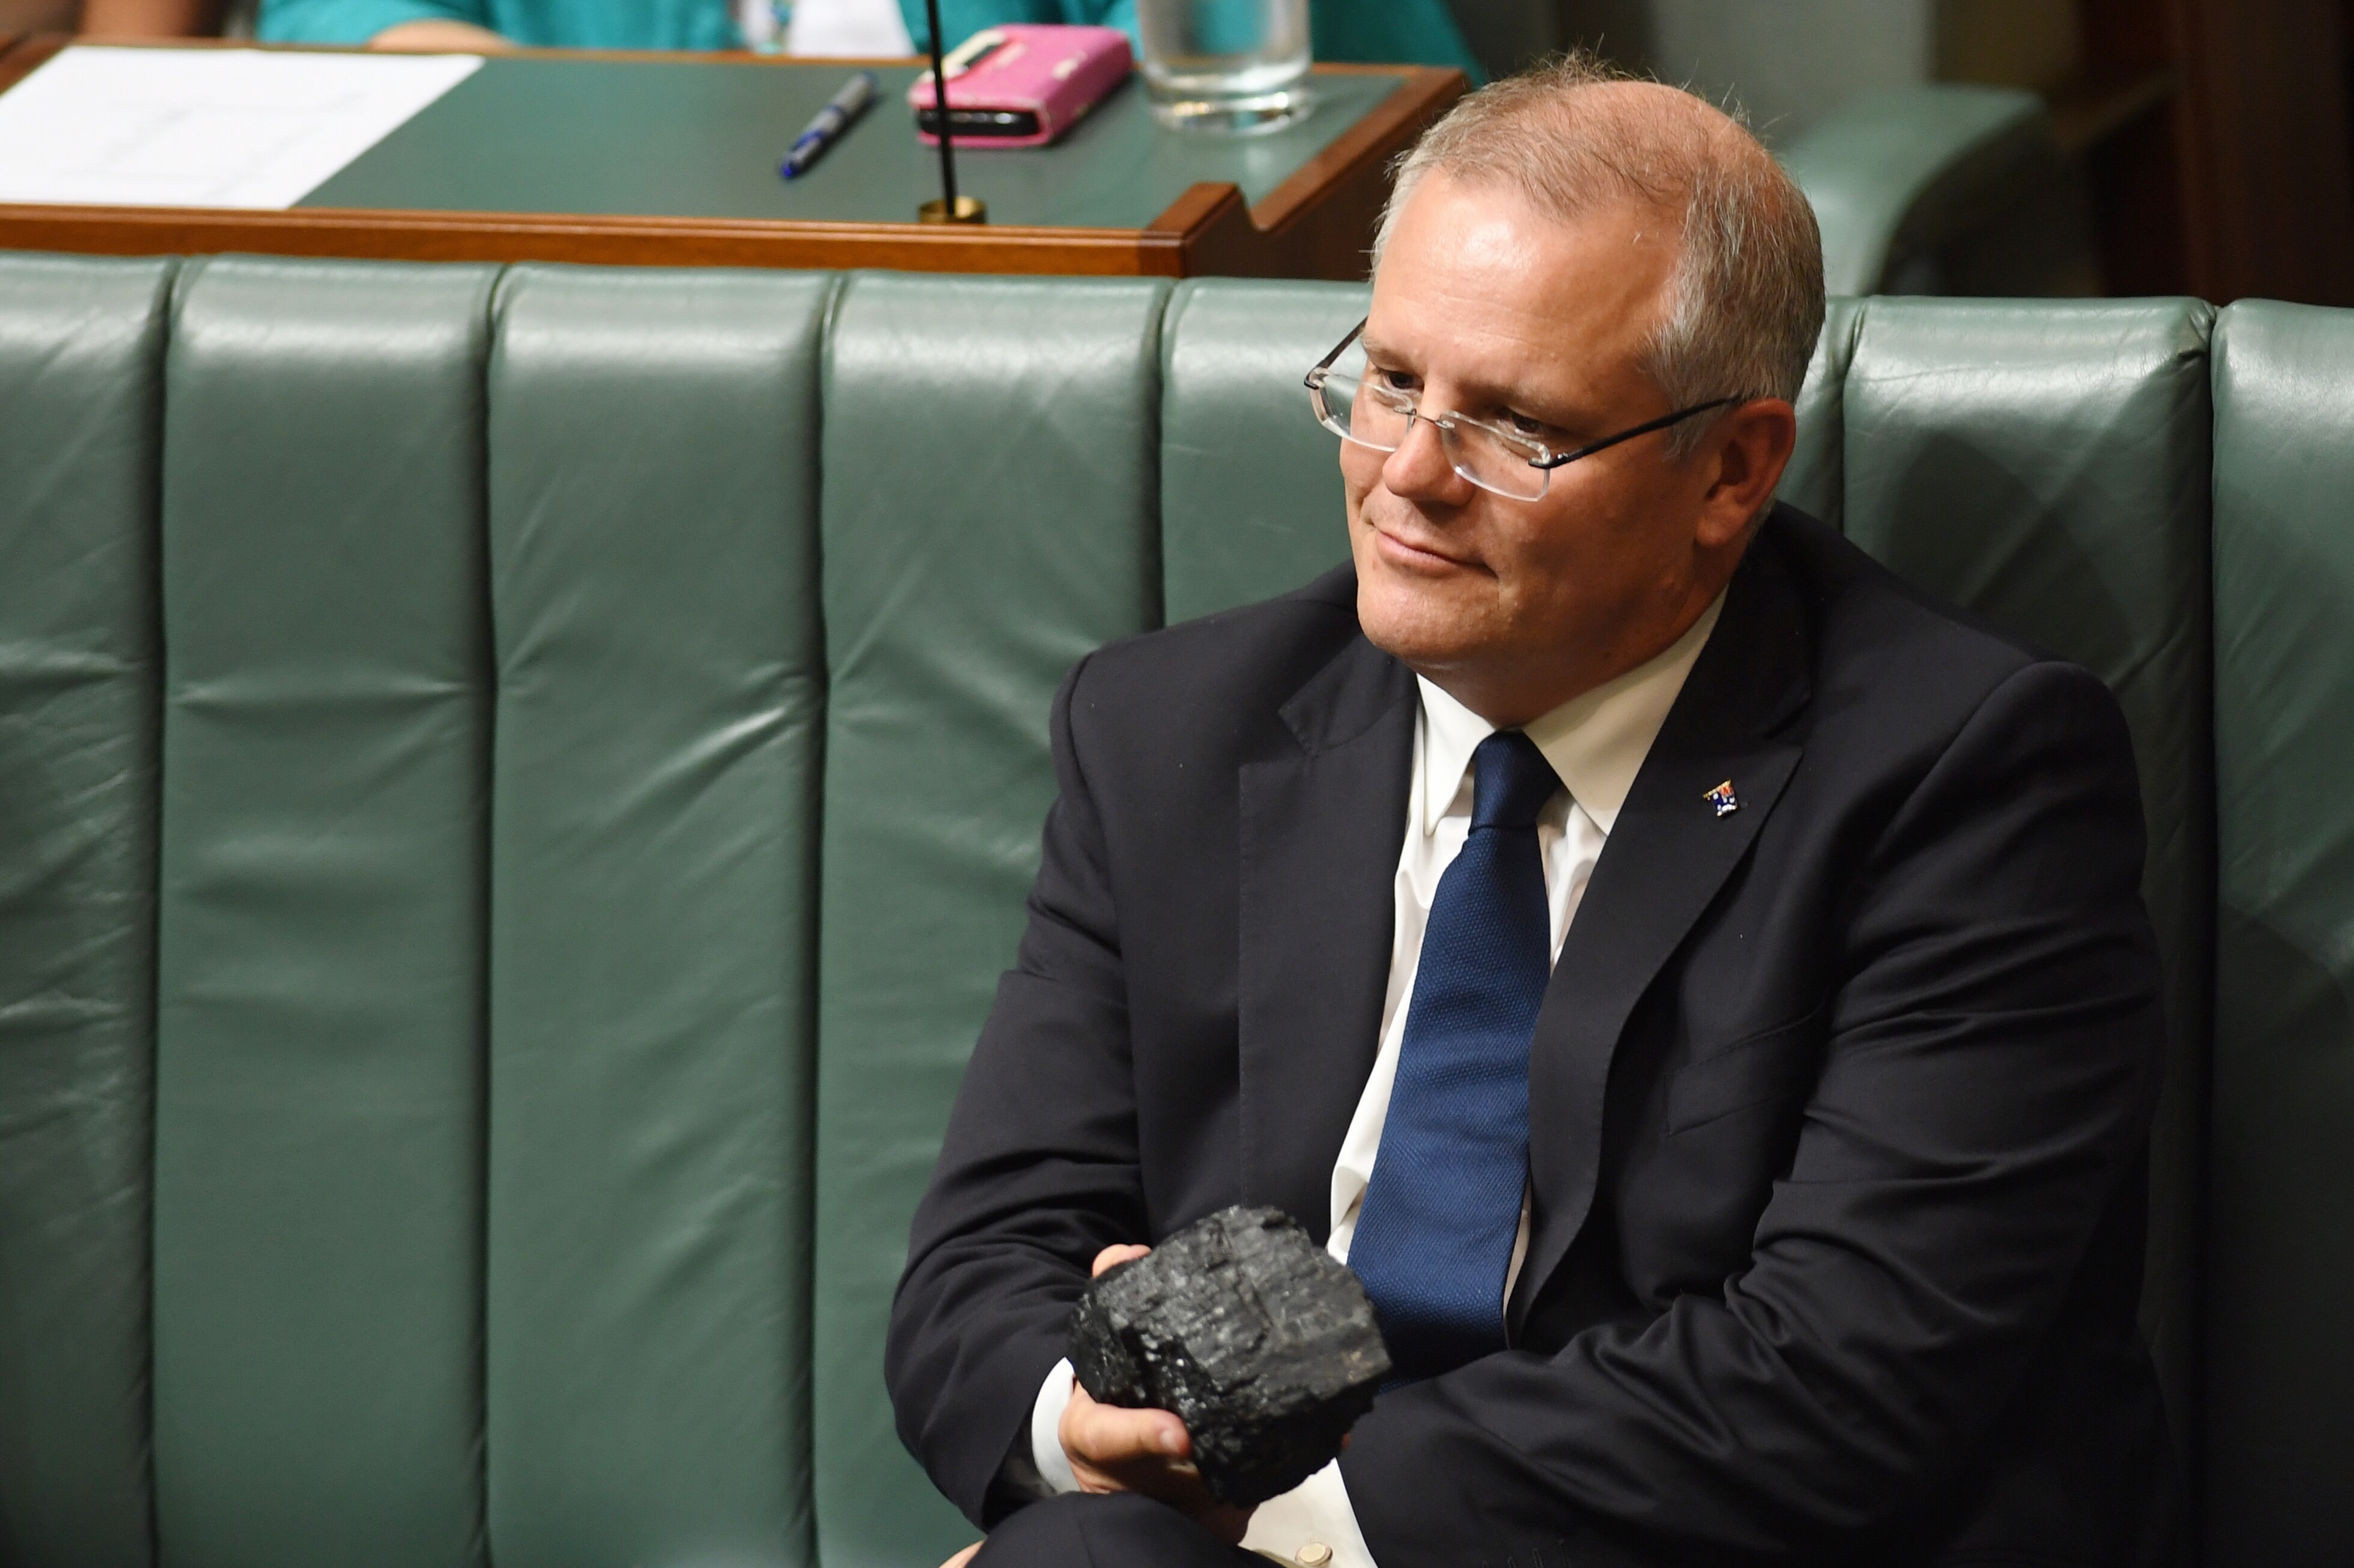 Scott Morrison with a piece of coal at Parliament House in Canberra in February 2017.